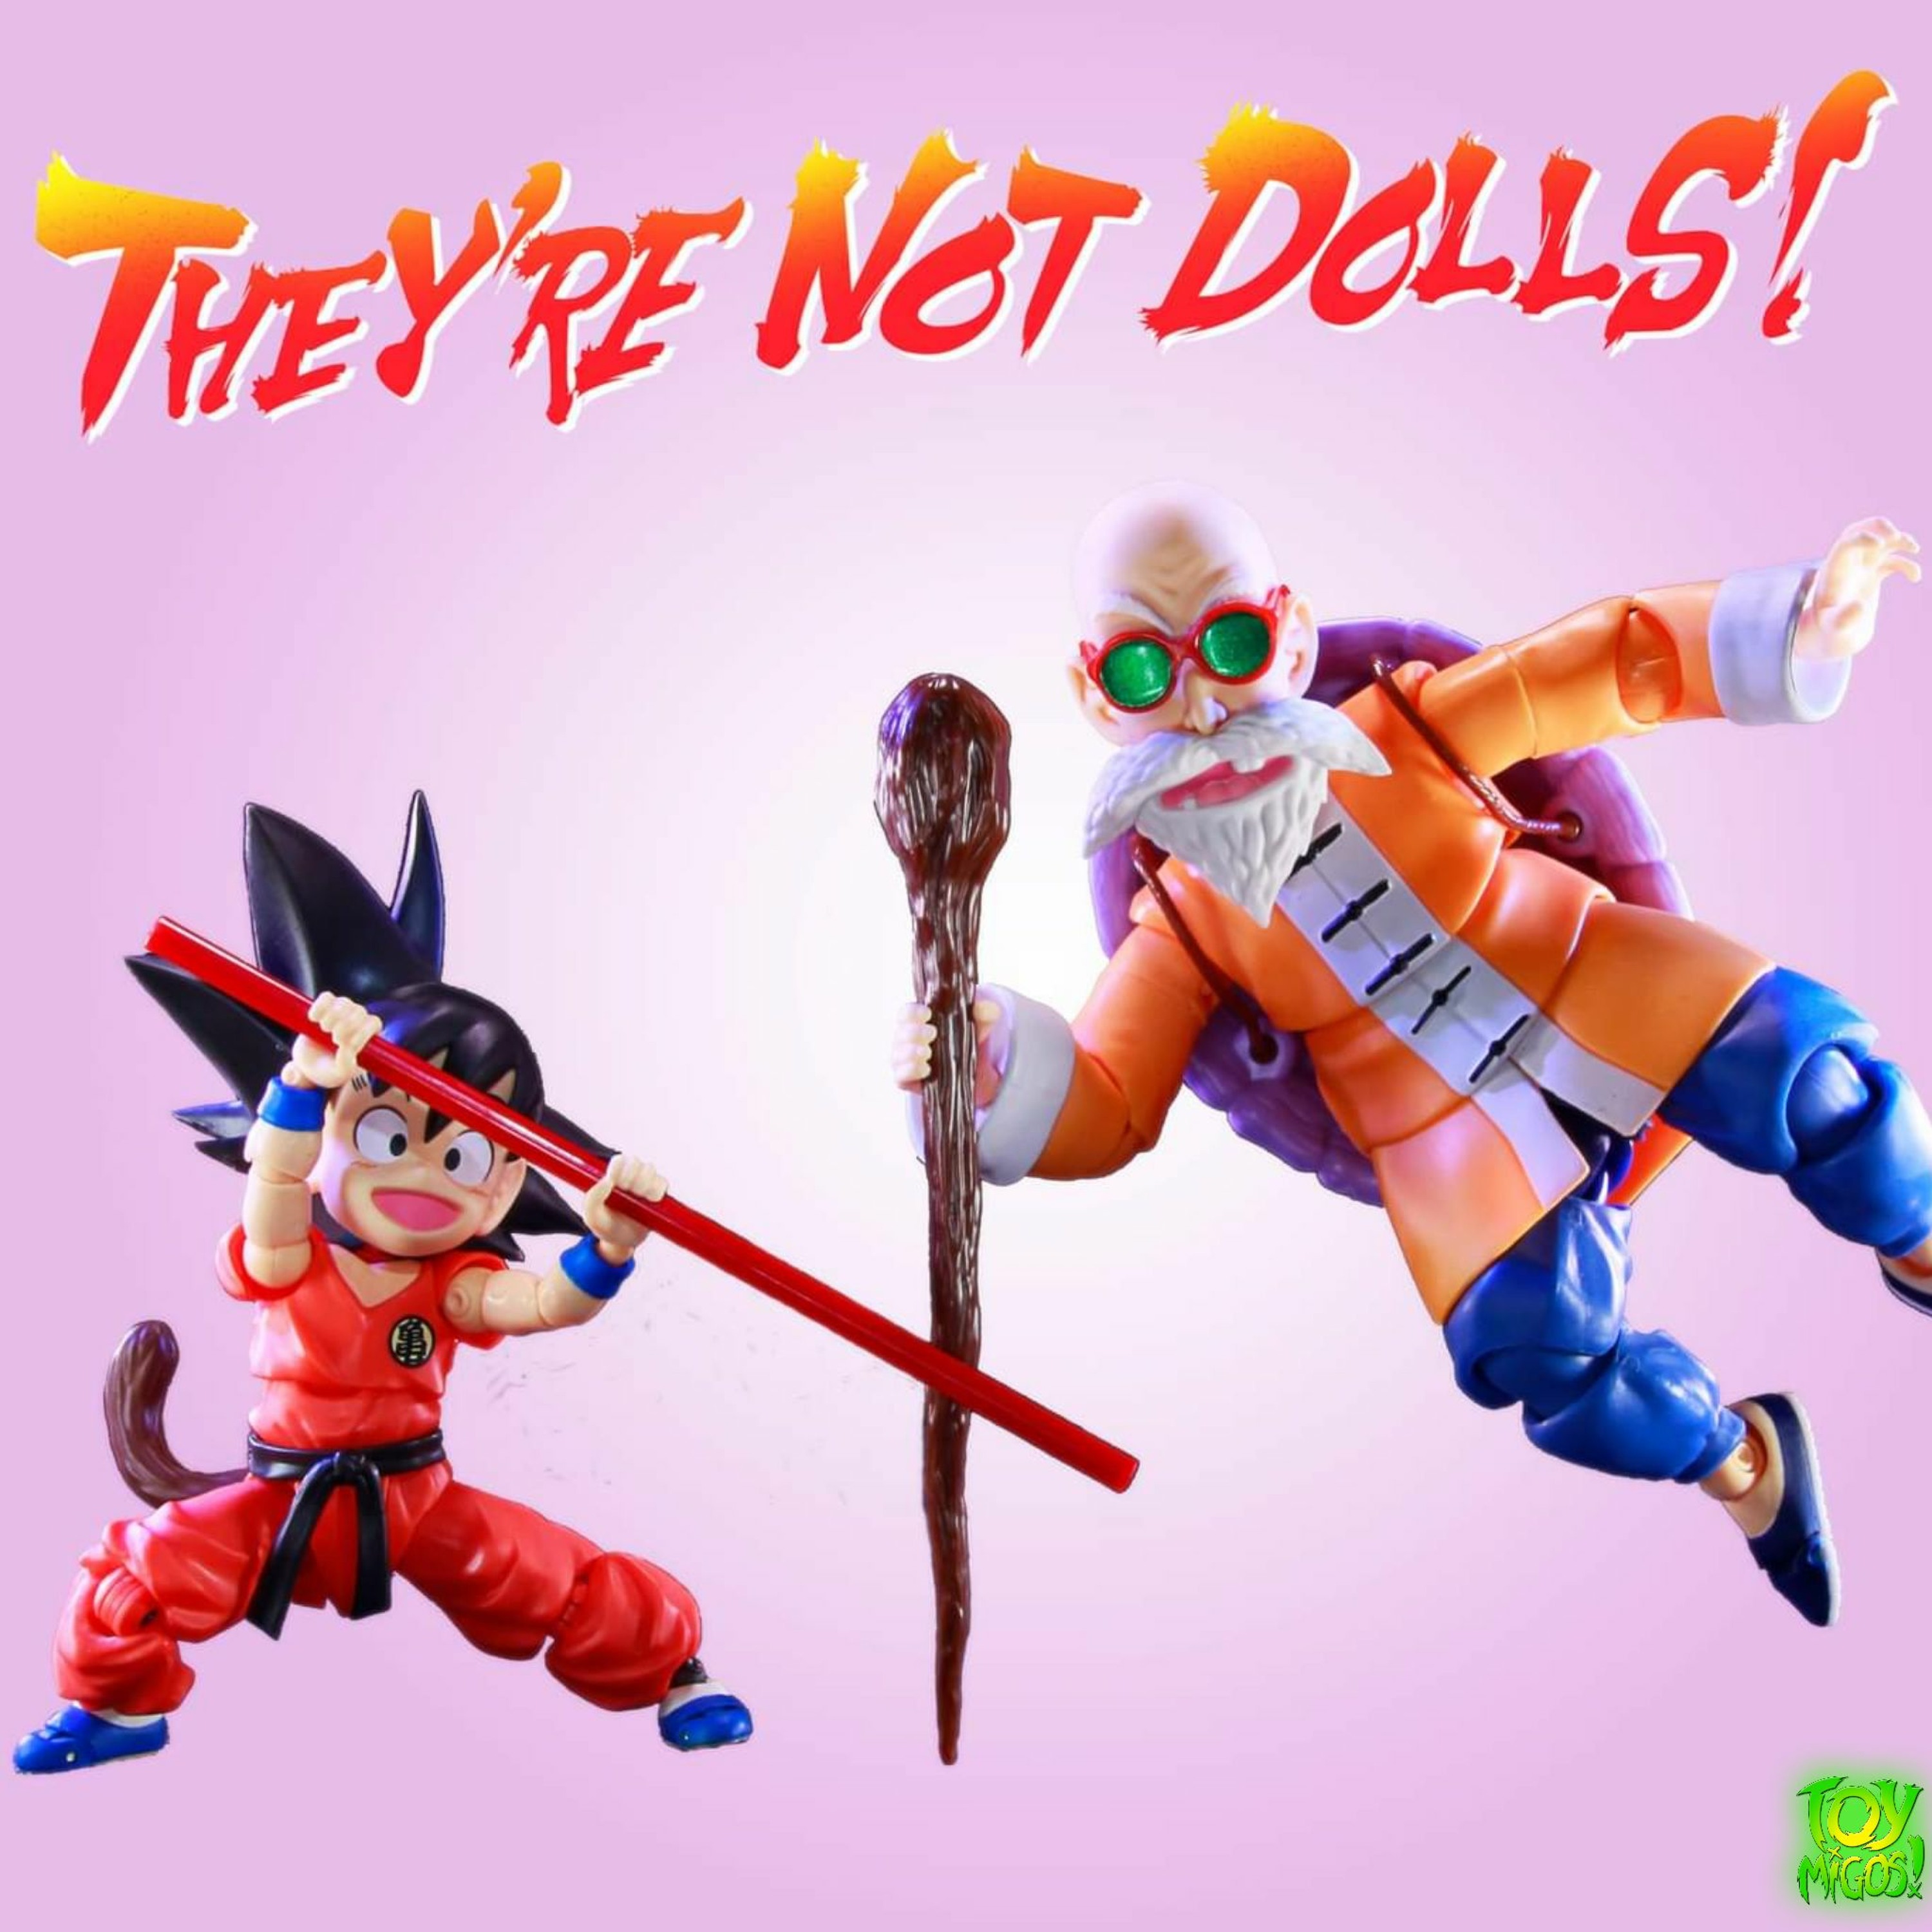 ”They’re not dolls!” Episode 296